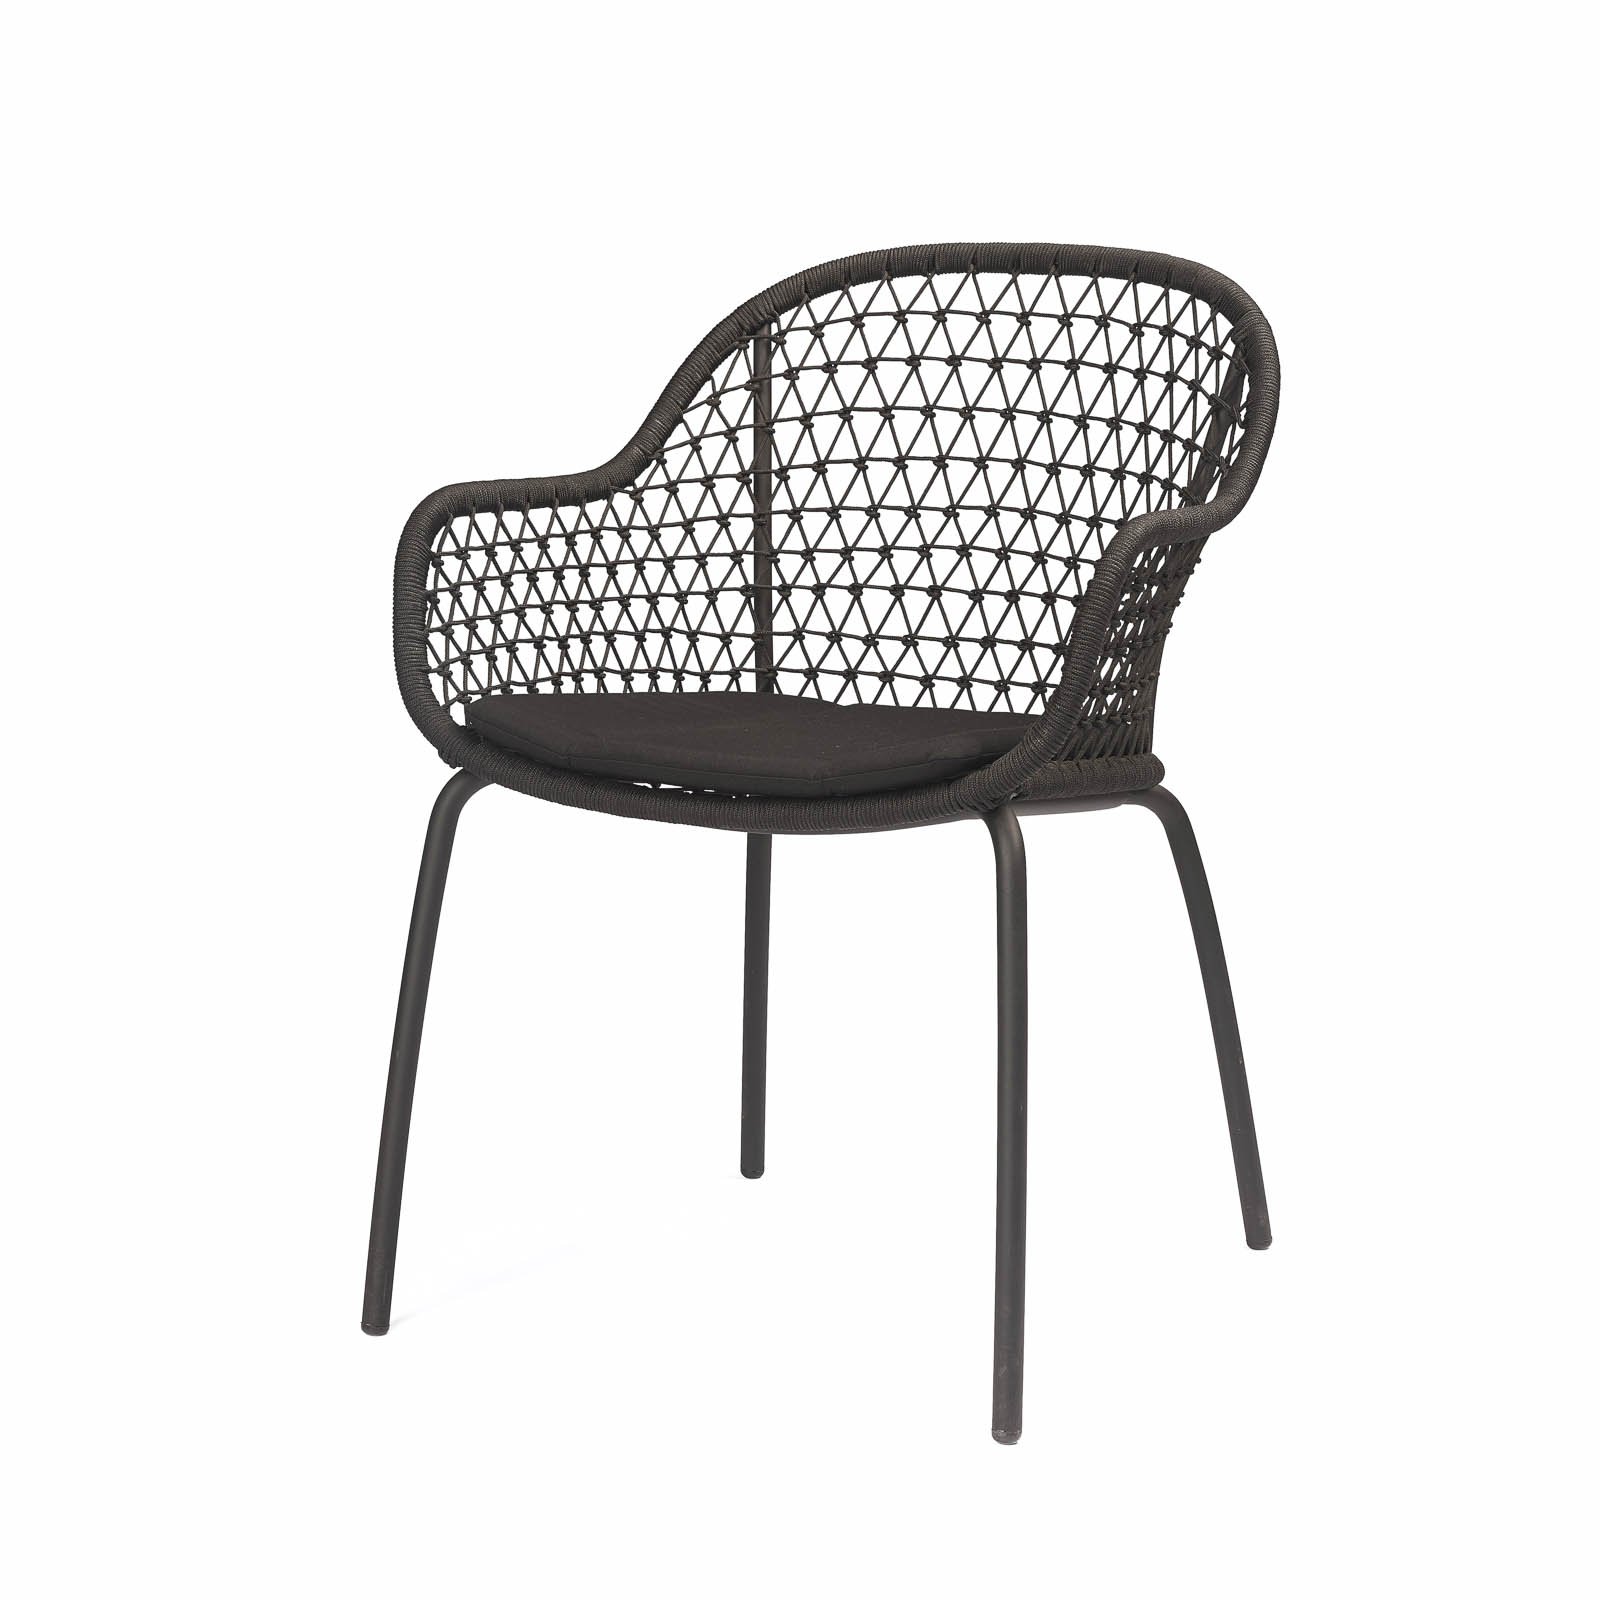 Libby Rope Outdoor Dining Arm Chair, Patio Café Seating